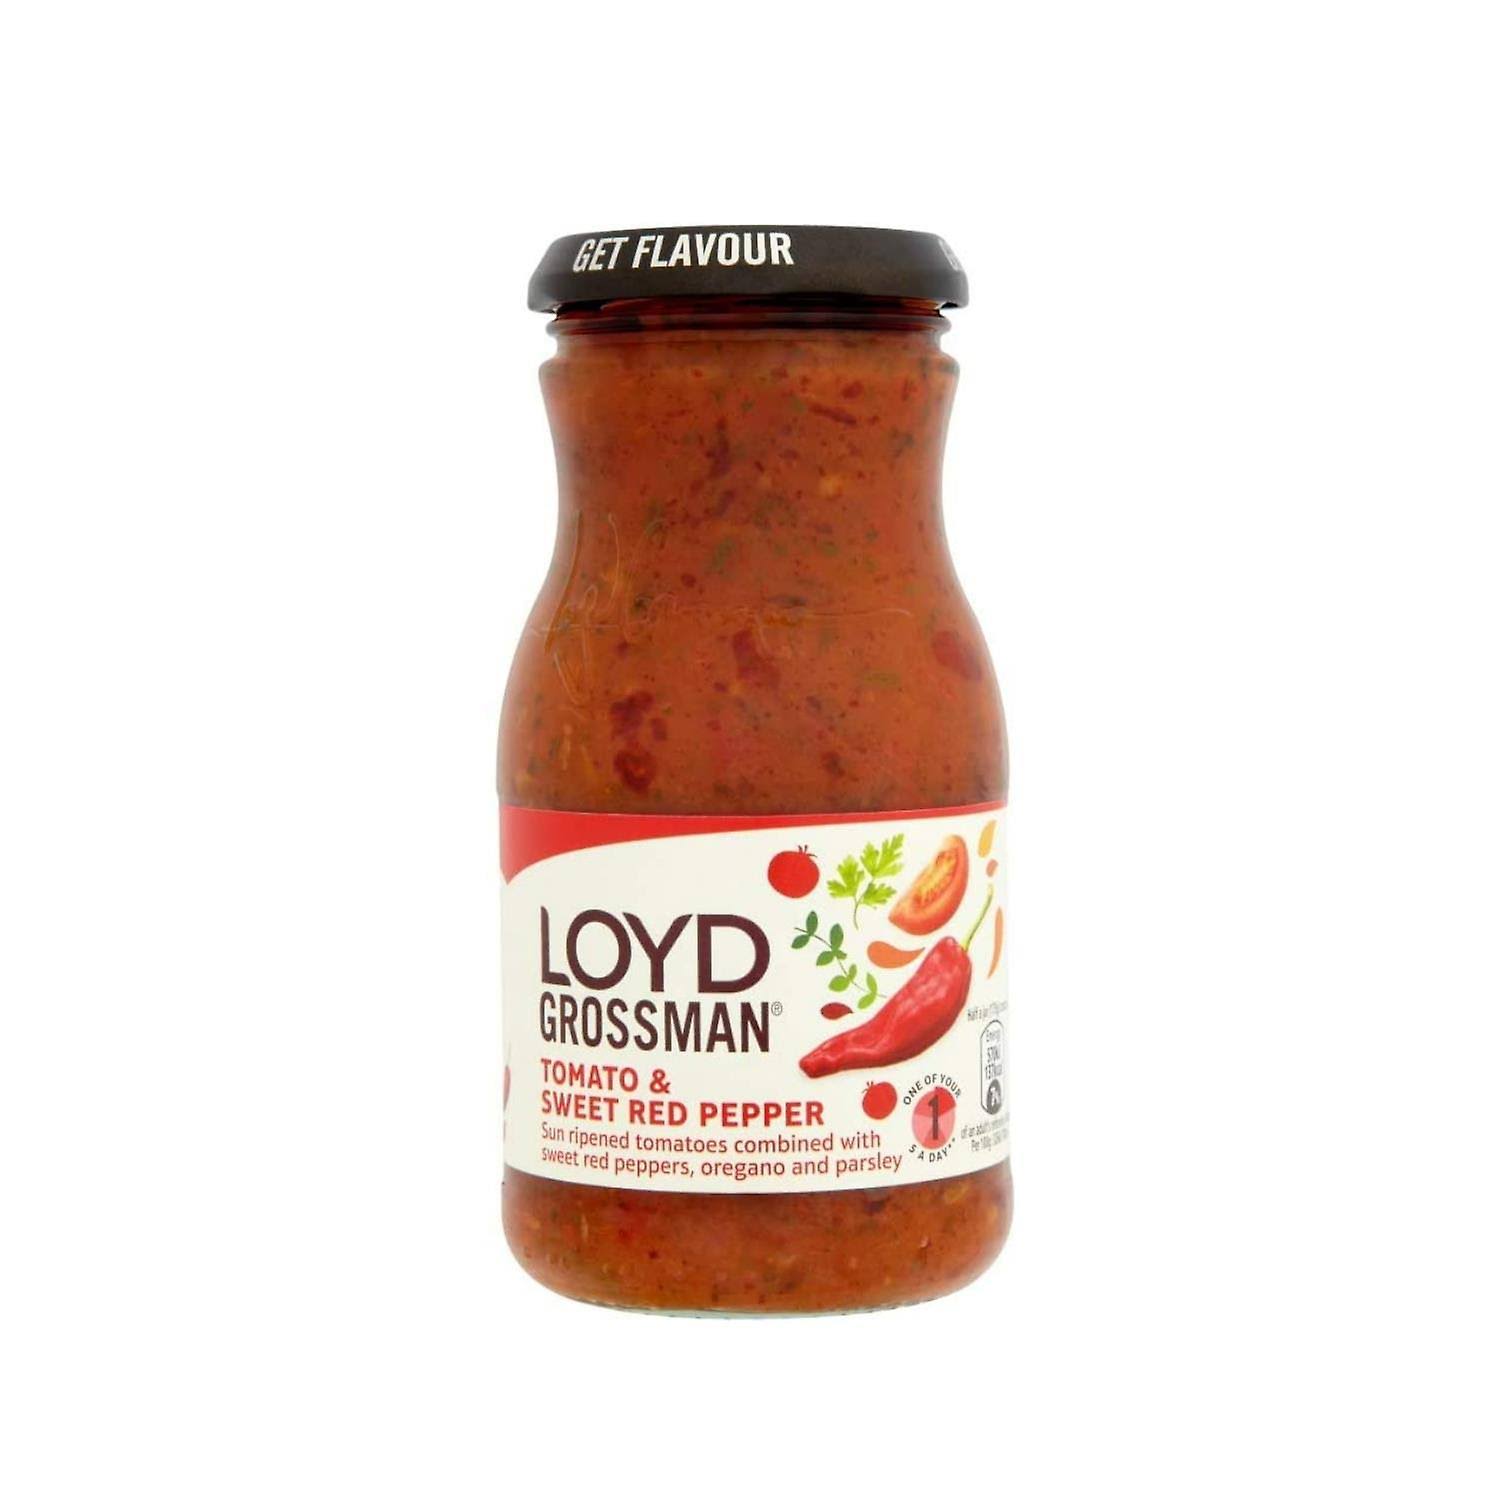 Loyd Grossman Tomato and Sweet Red Pepper Pasta Sauce - 350g